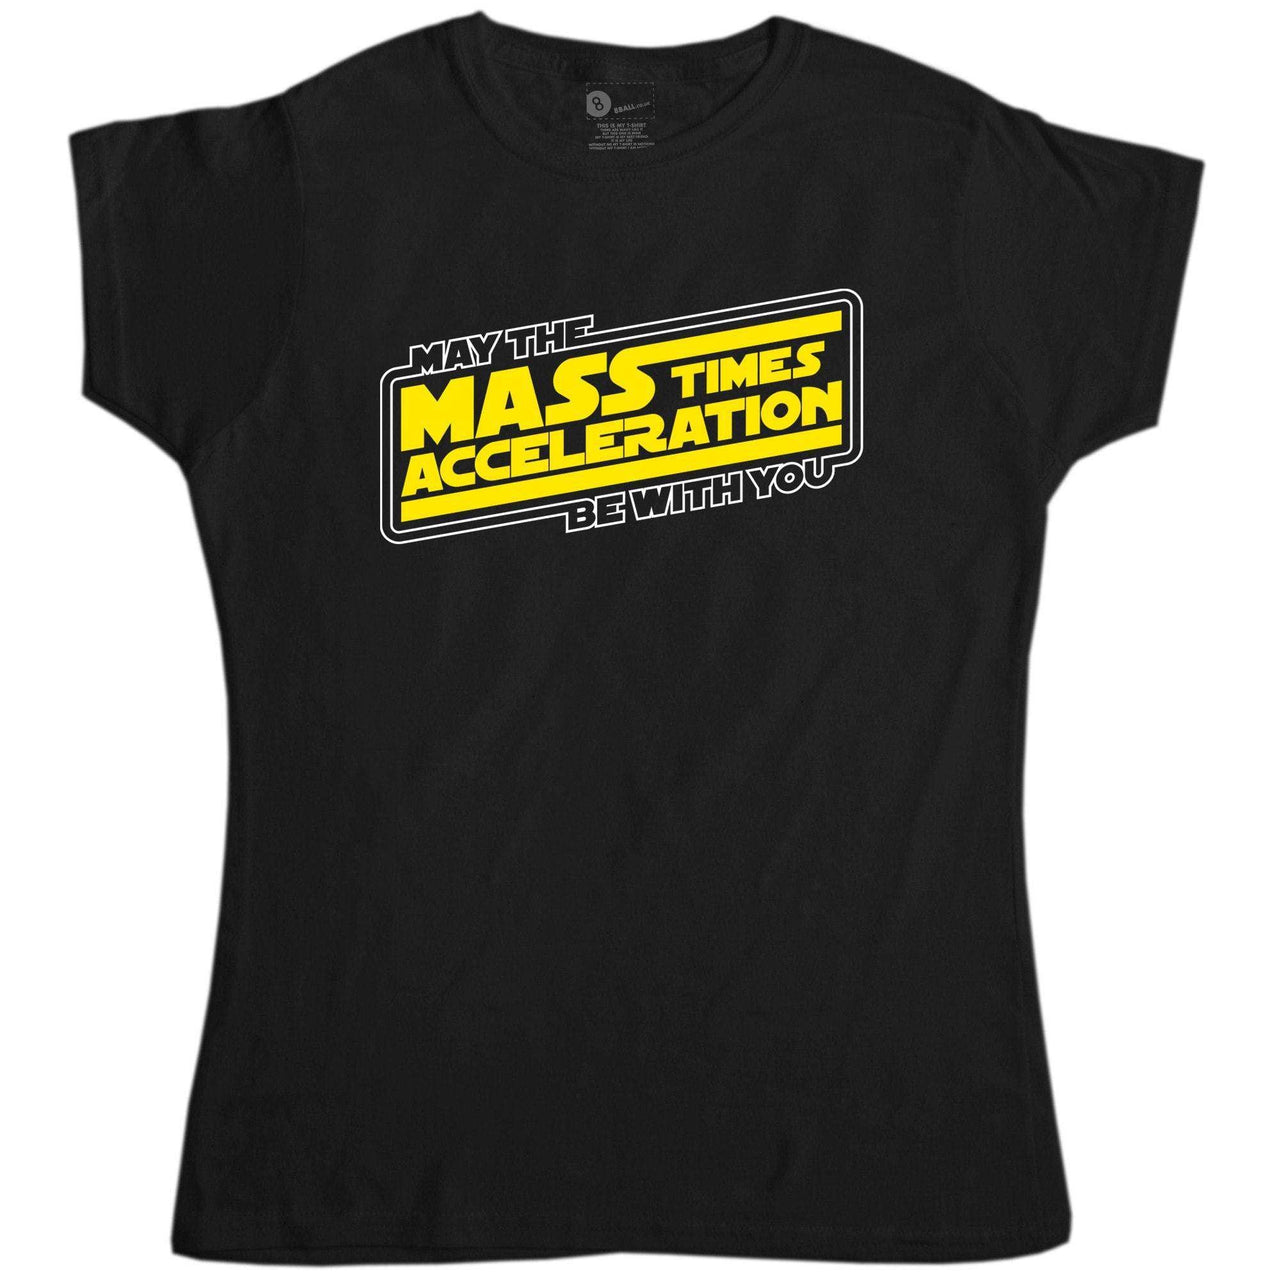 Geek May The Mass Times Acceleration Be With You T-Shirt for Women 8Ball